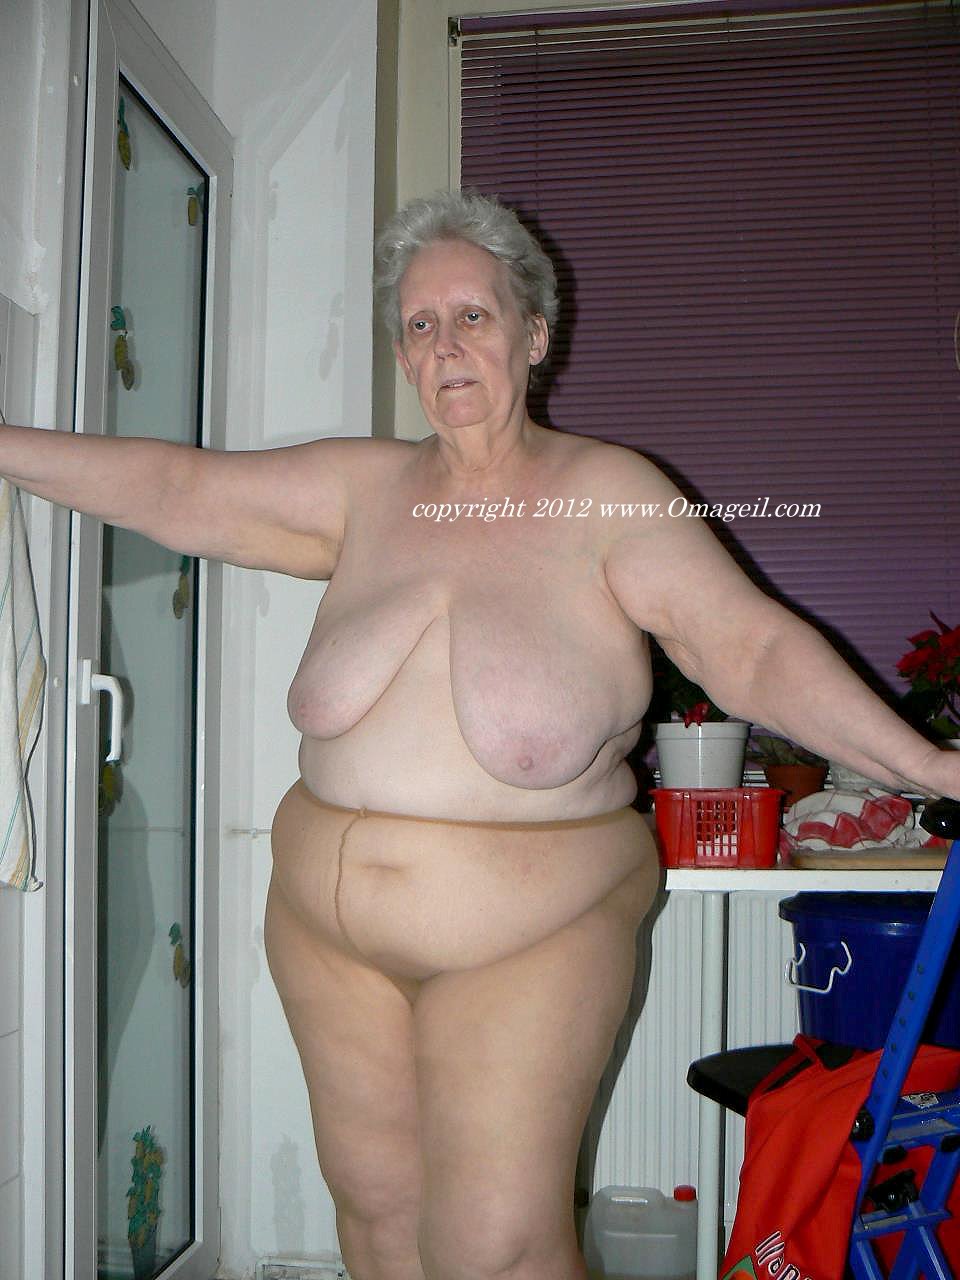 Hot Granny Porn Pictures and Vids - Free Granny and Mature ...